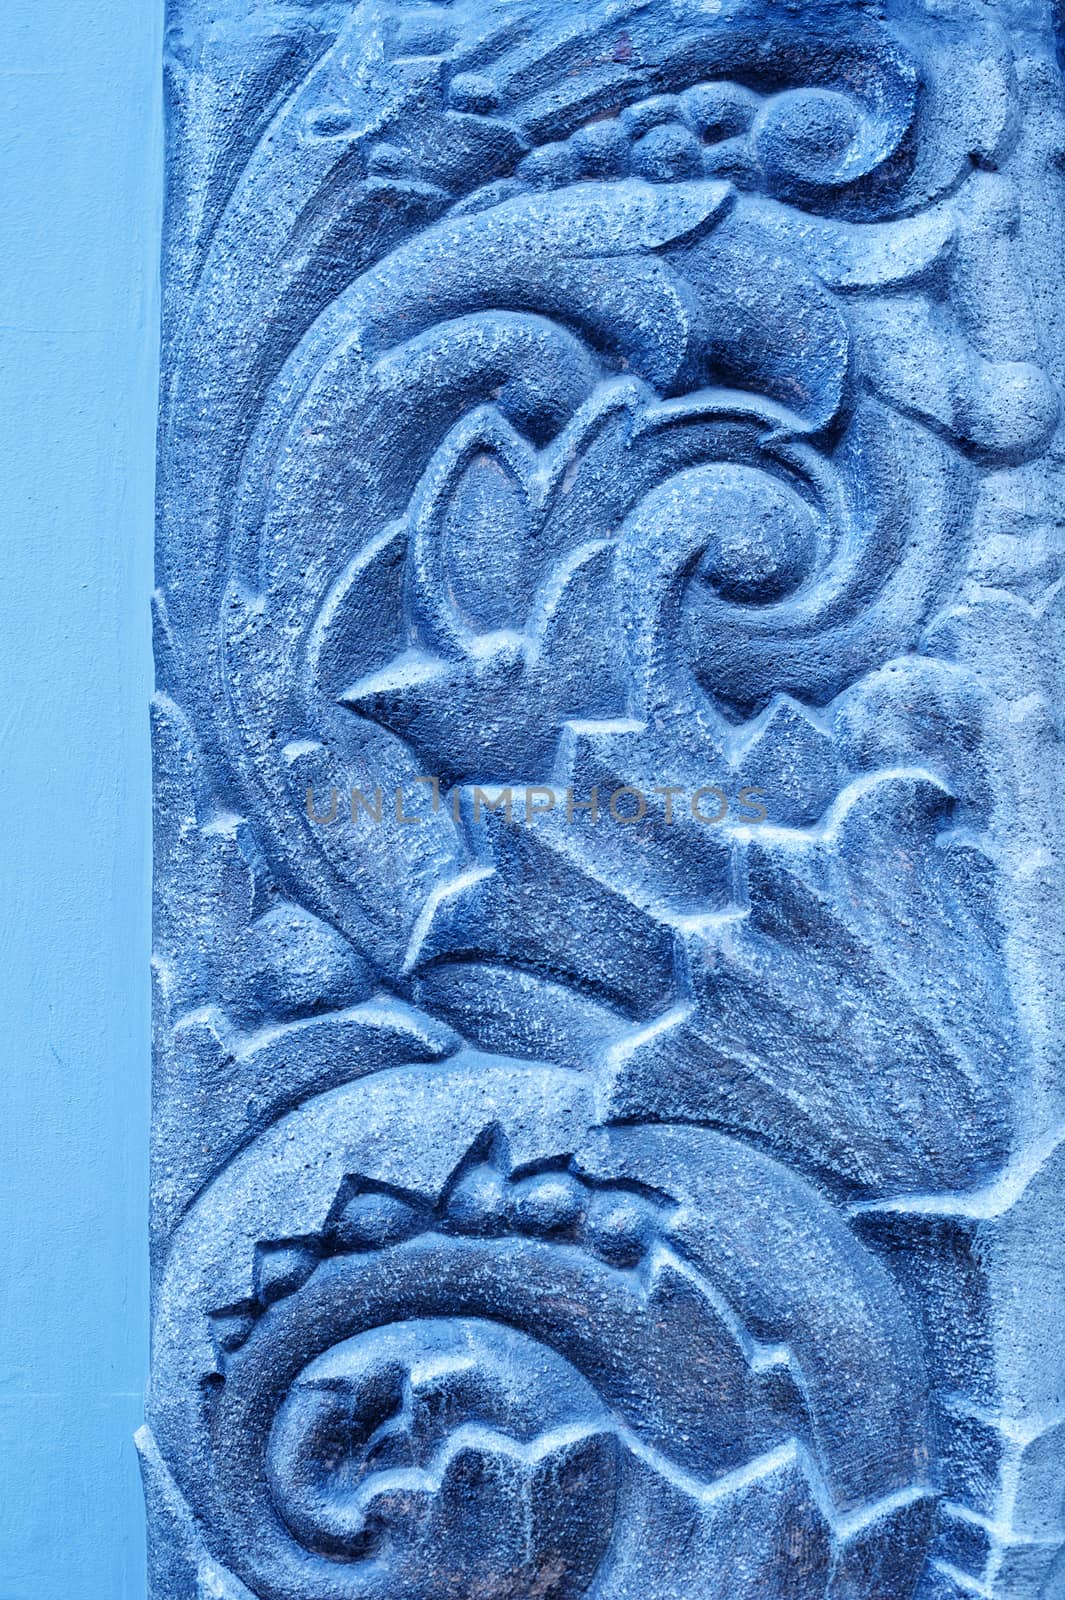 blue plaster mural on a wall background by timonko